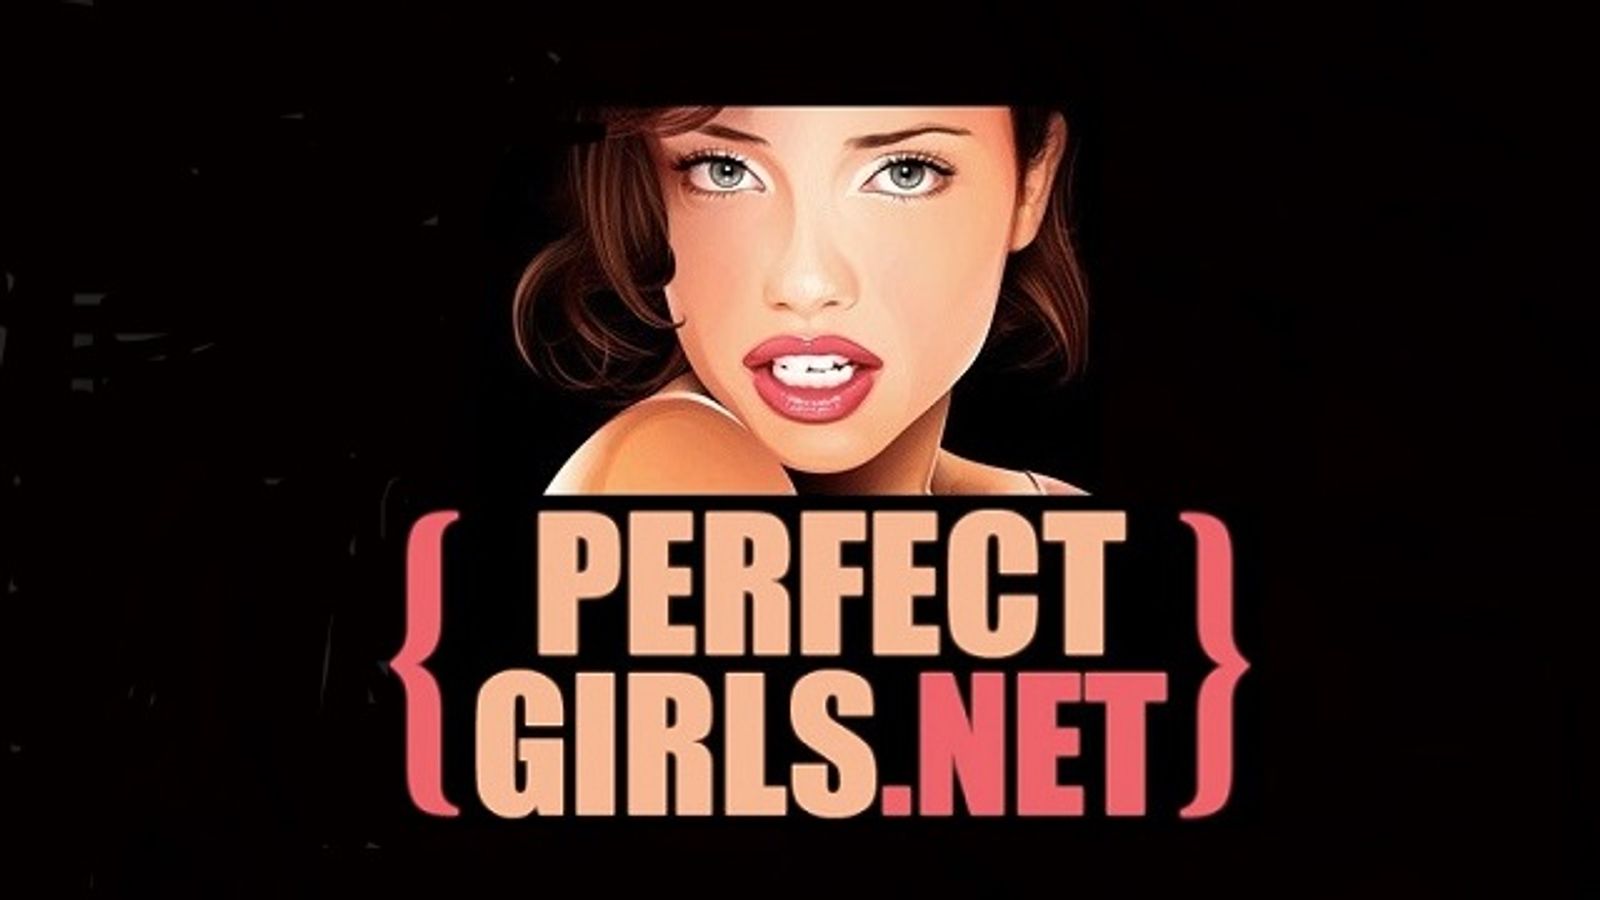 ExoClick Signs Exclusive Deal with PerfectGirls.net